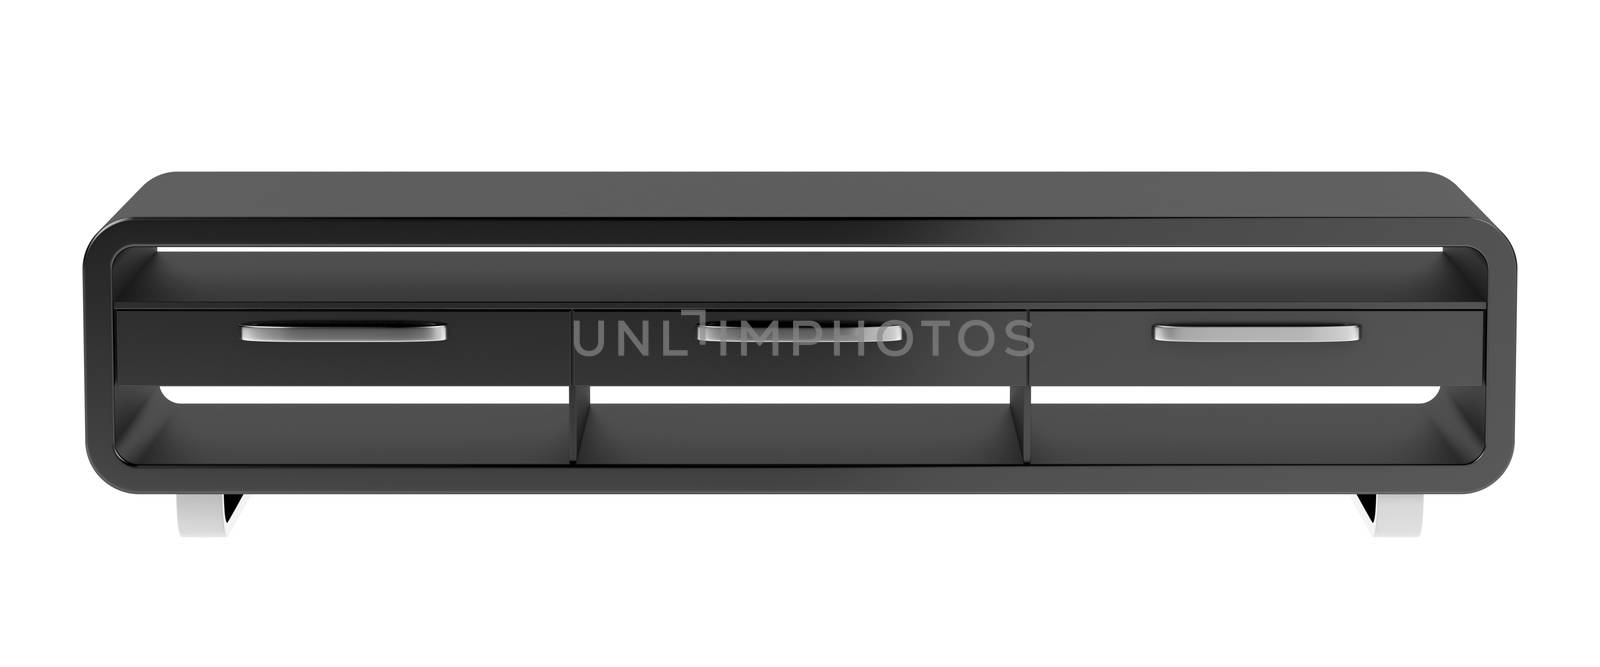 Black tv stand isolated on white background